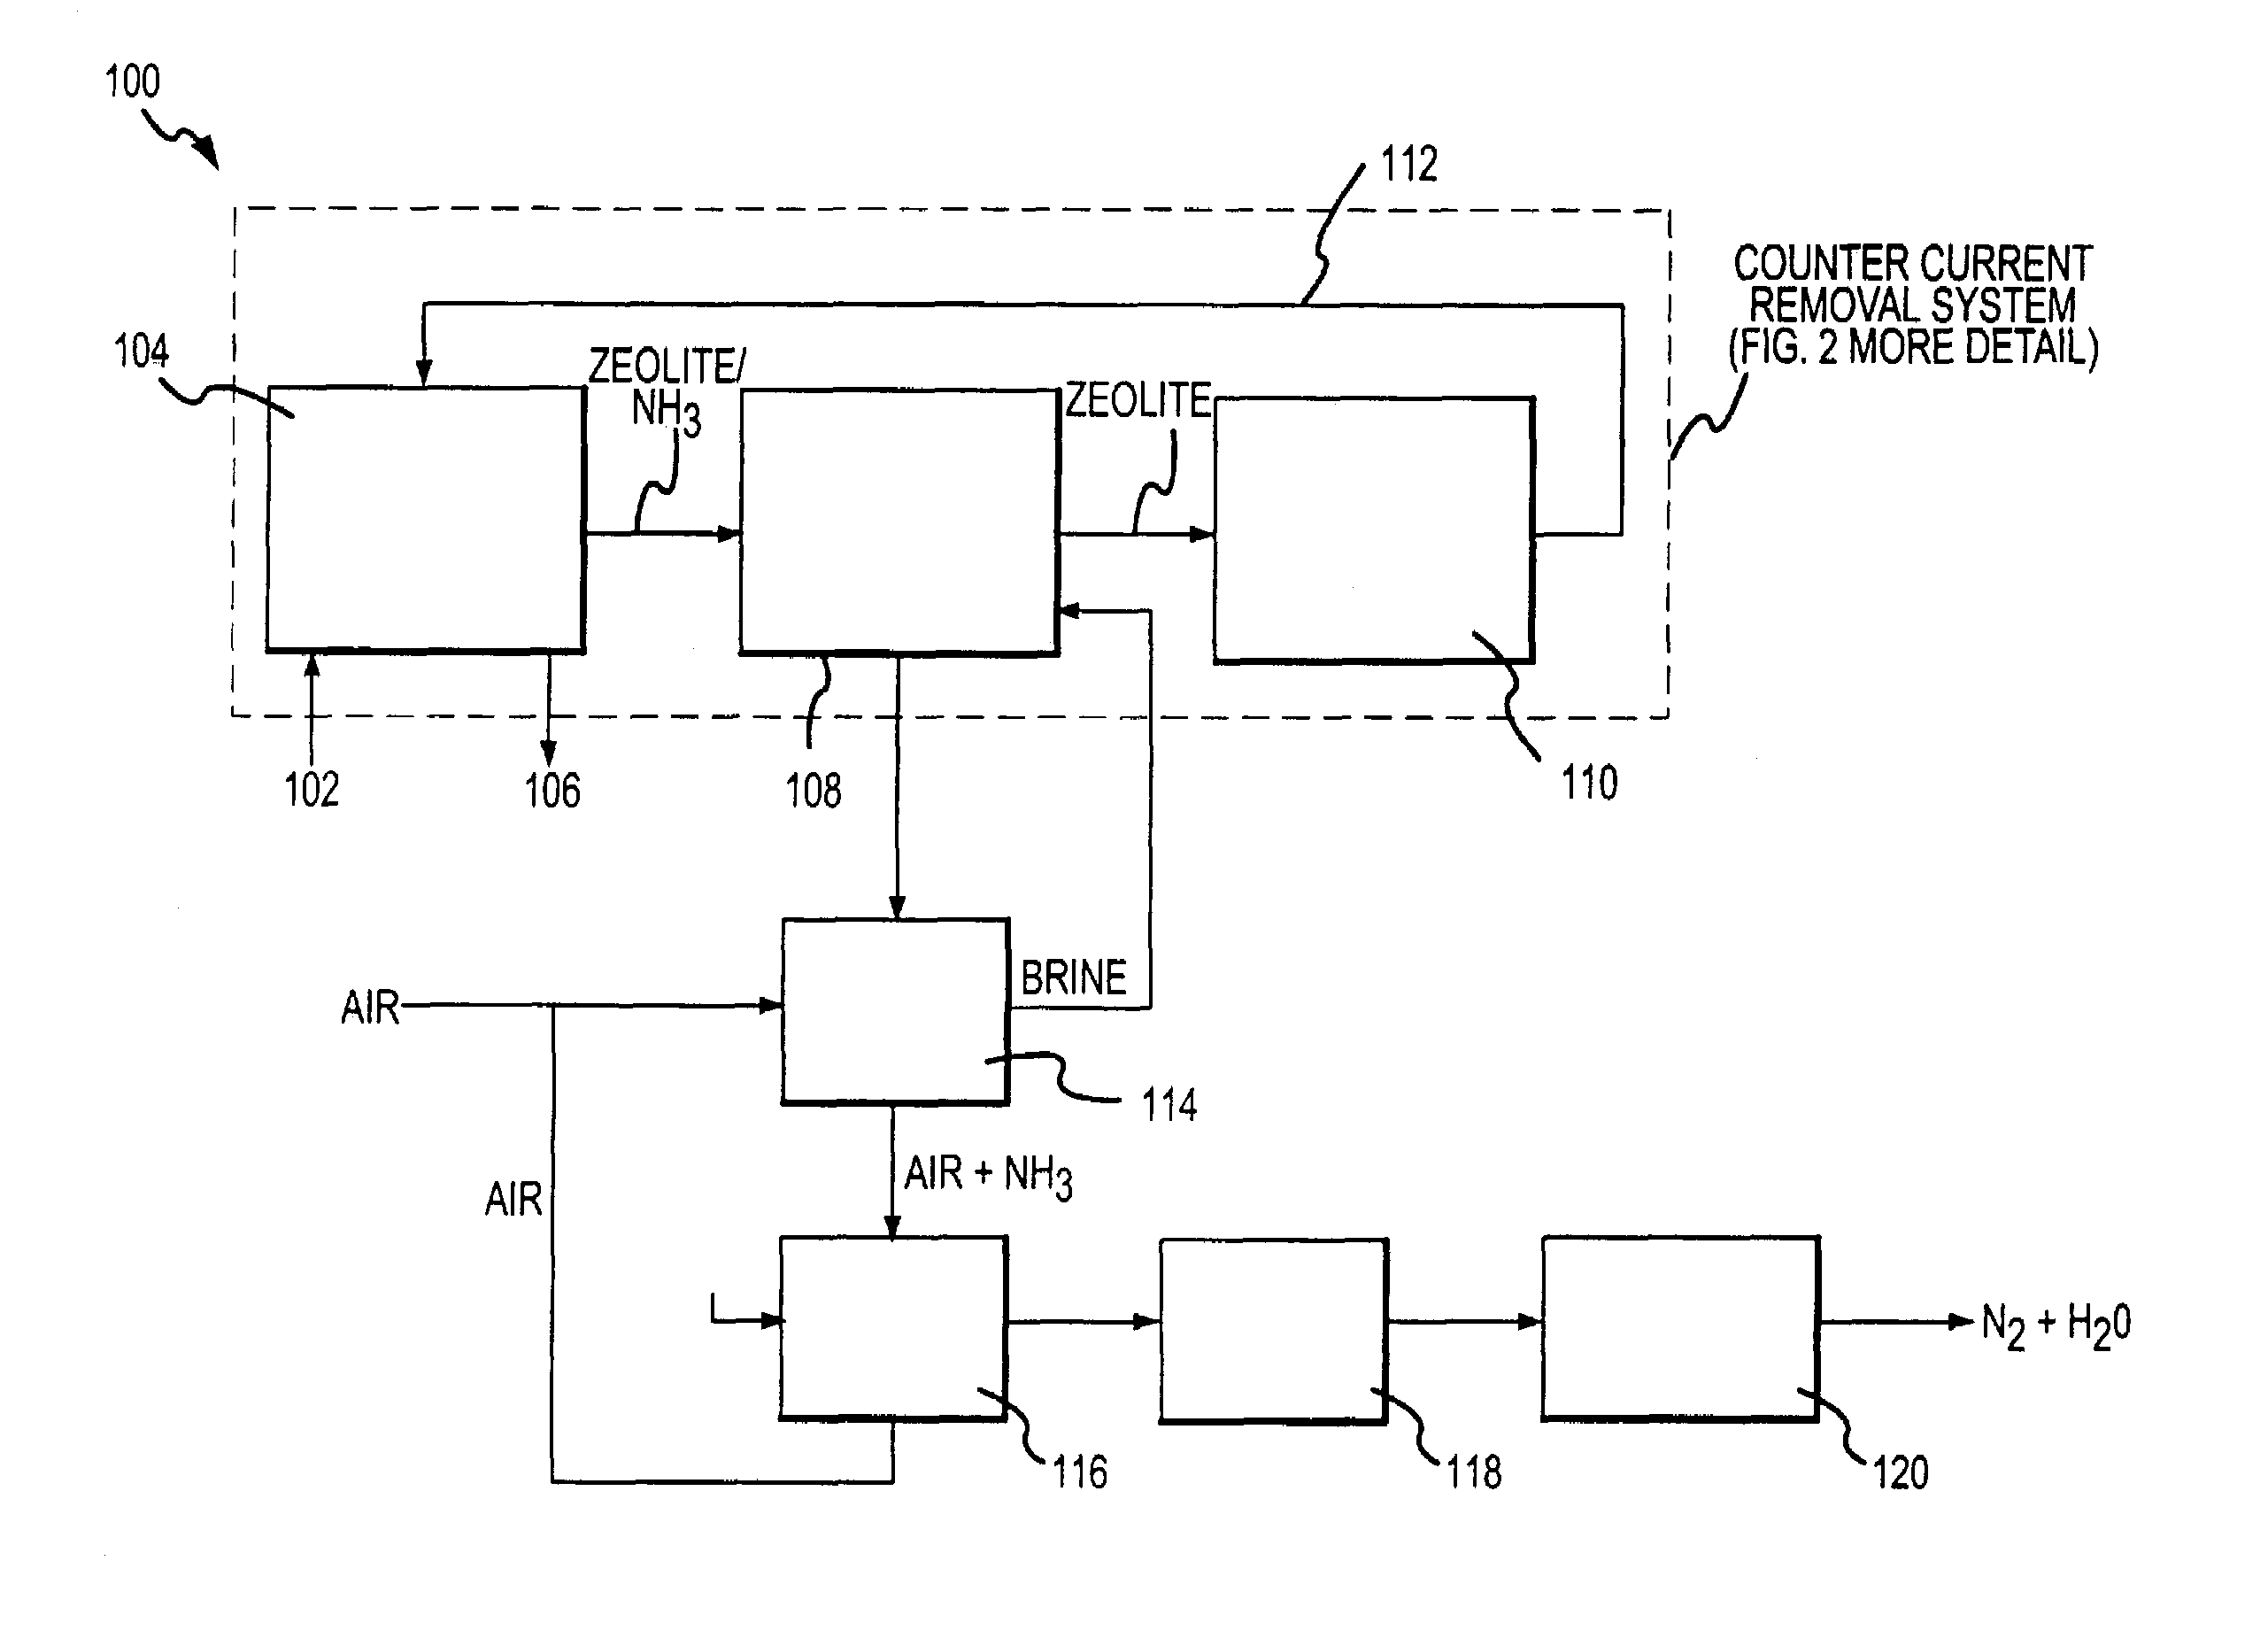 Apparatus for removal and destruction of ammonia from an aqueous medium